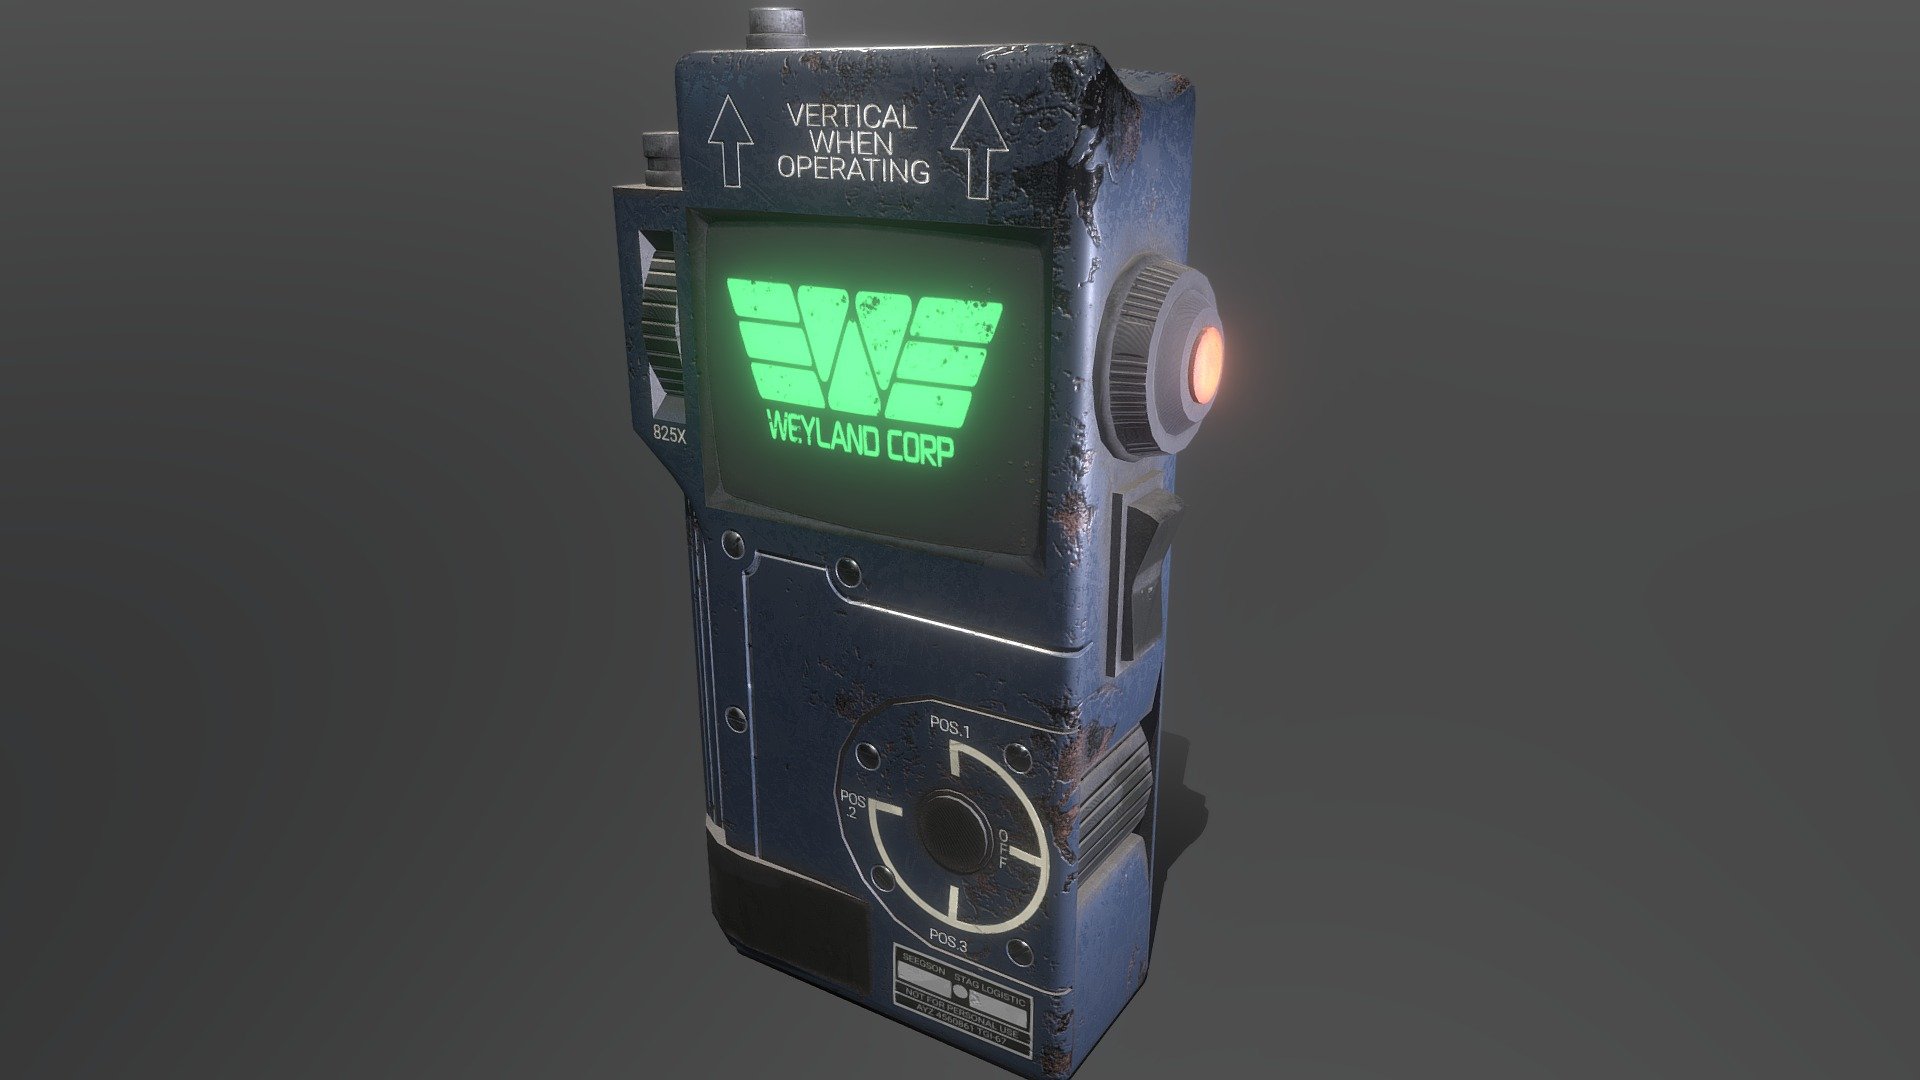 A recreation of the Hack Tool from the first person horror game Alien Isolation.
Made over 3 days of 2400 polys and 1 2K texture set - Alien Isolation Hack Tool - 3D model by Kelvin Avey (@ka2851) 3d model